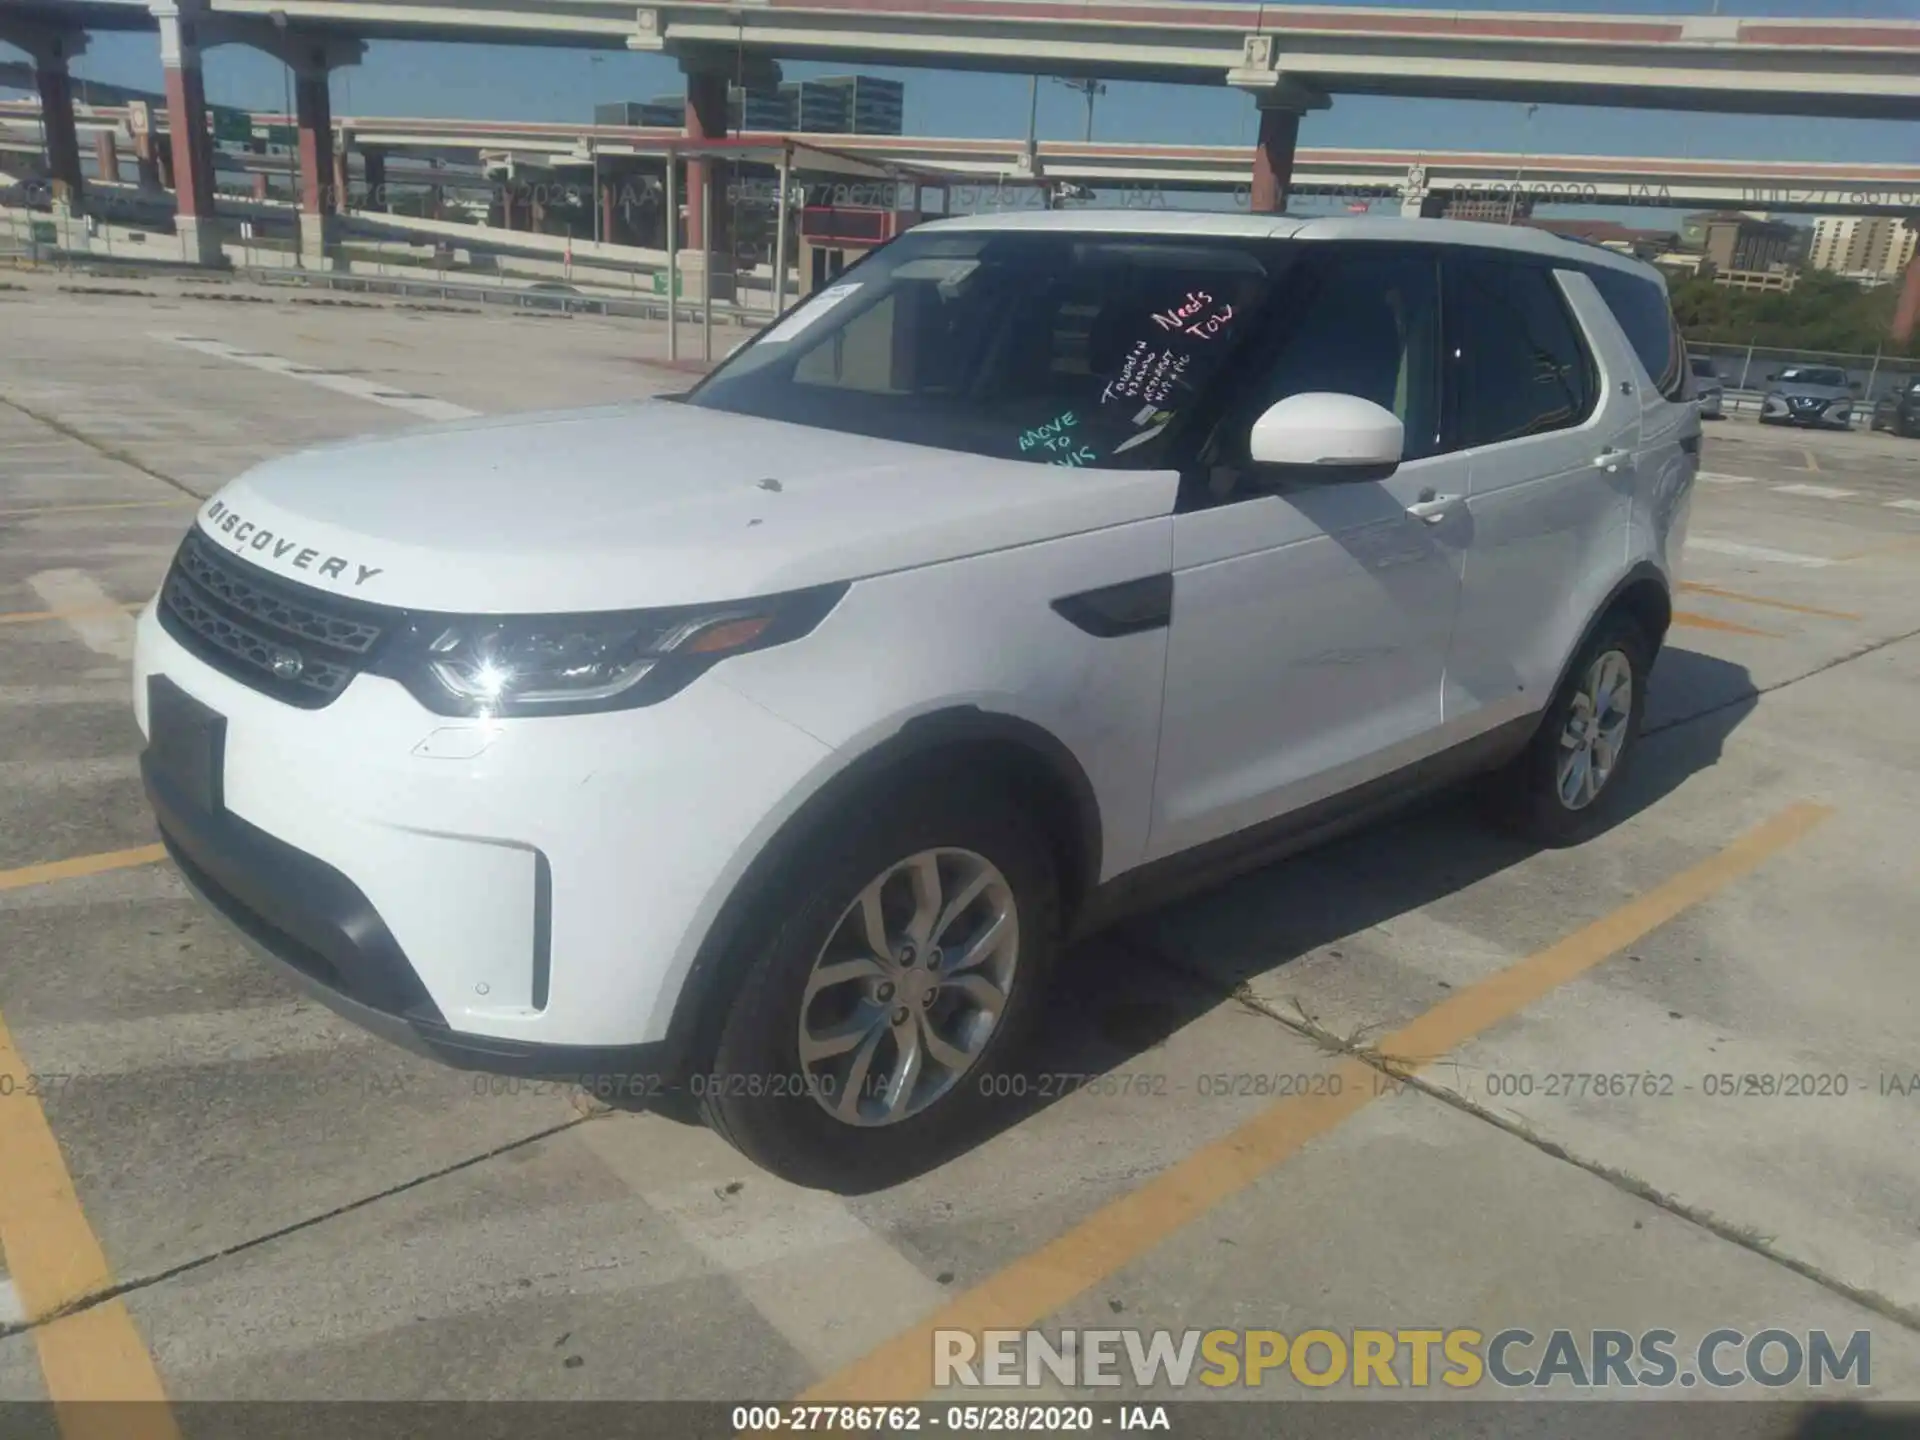 2 Photograph of a damaged car SALRG2RV7L2426105 LAND ROVER DISCOVERY 2020